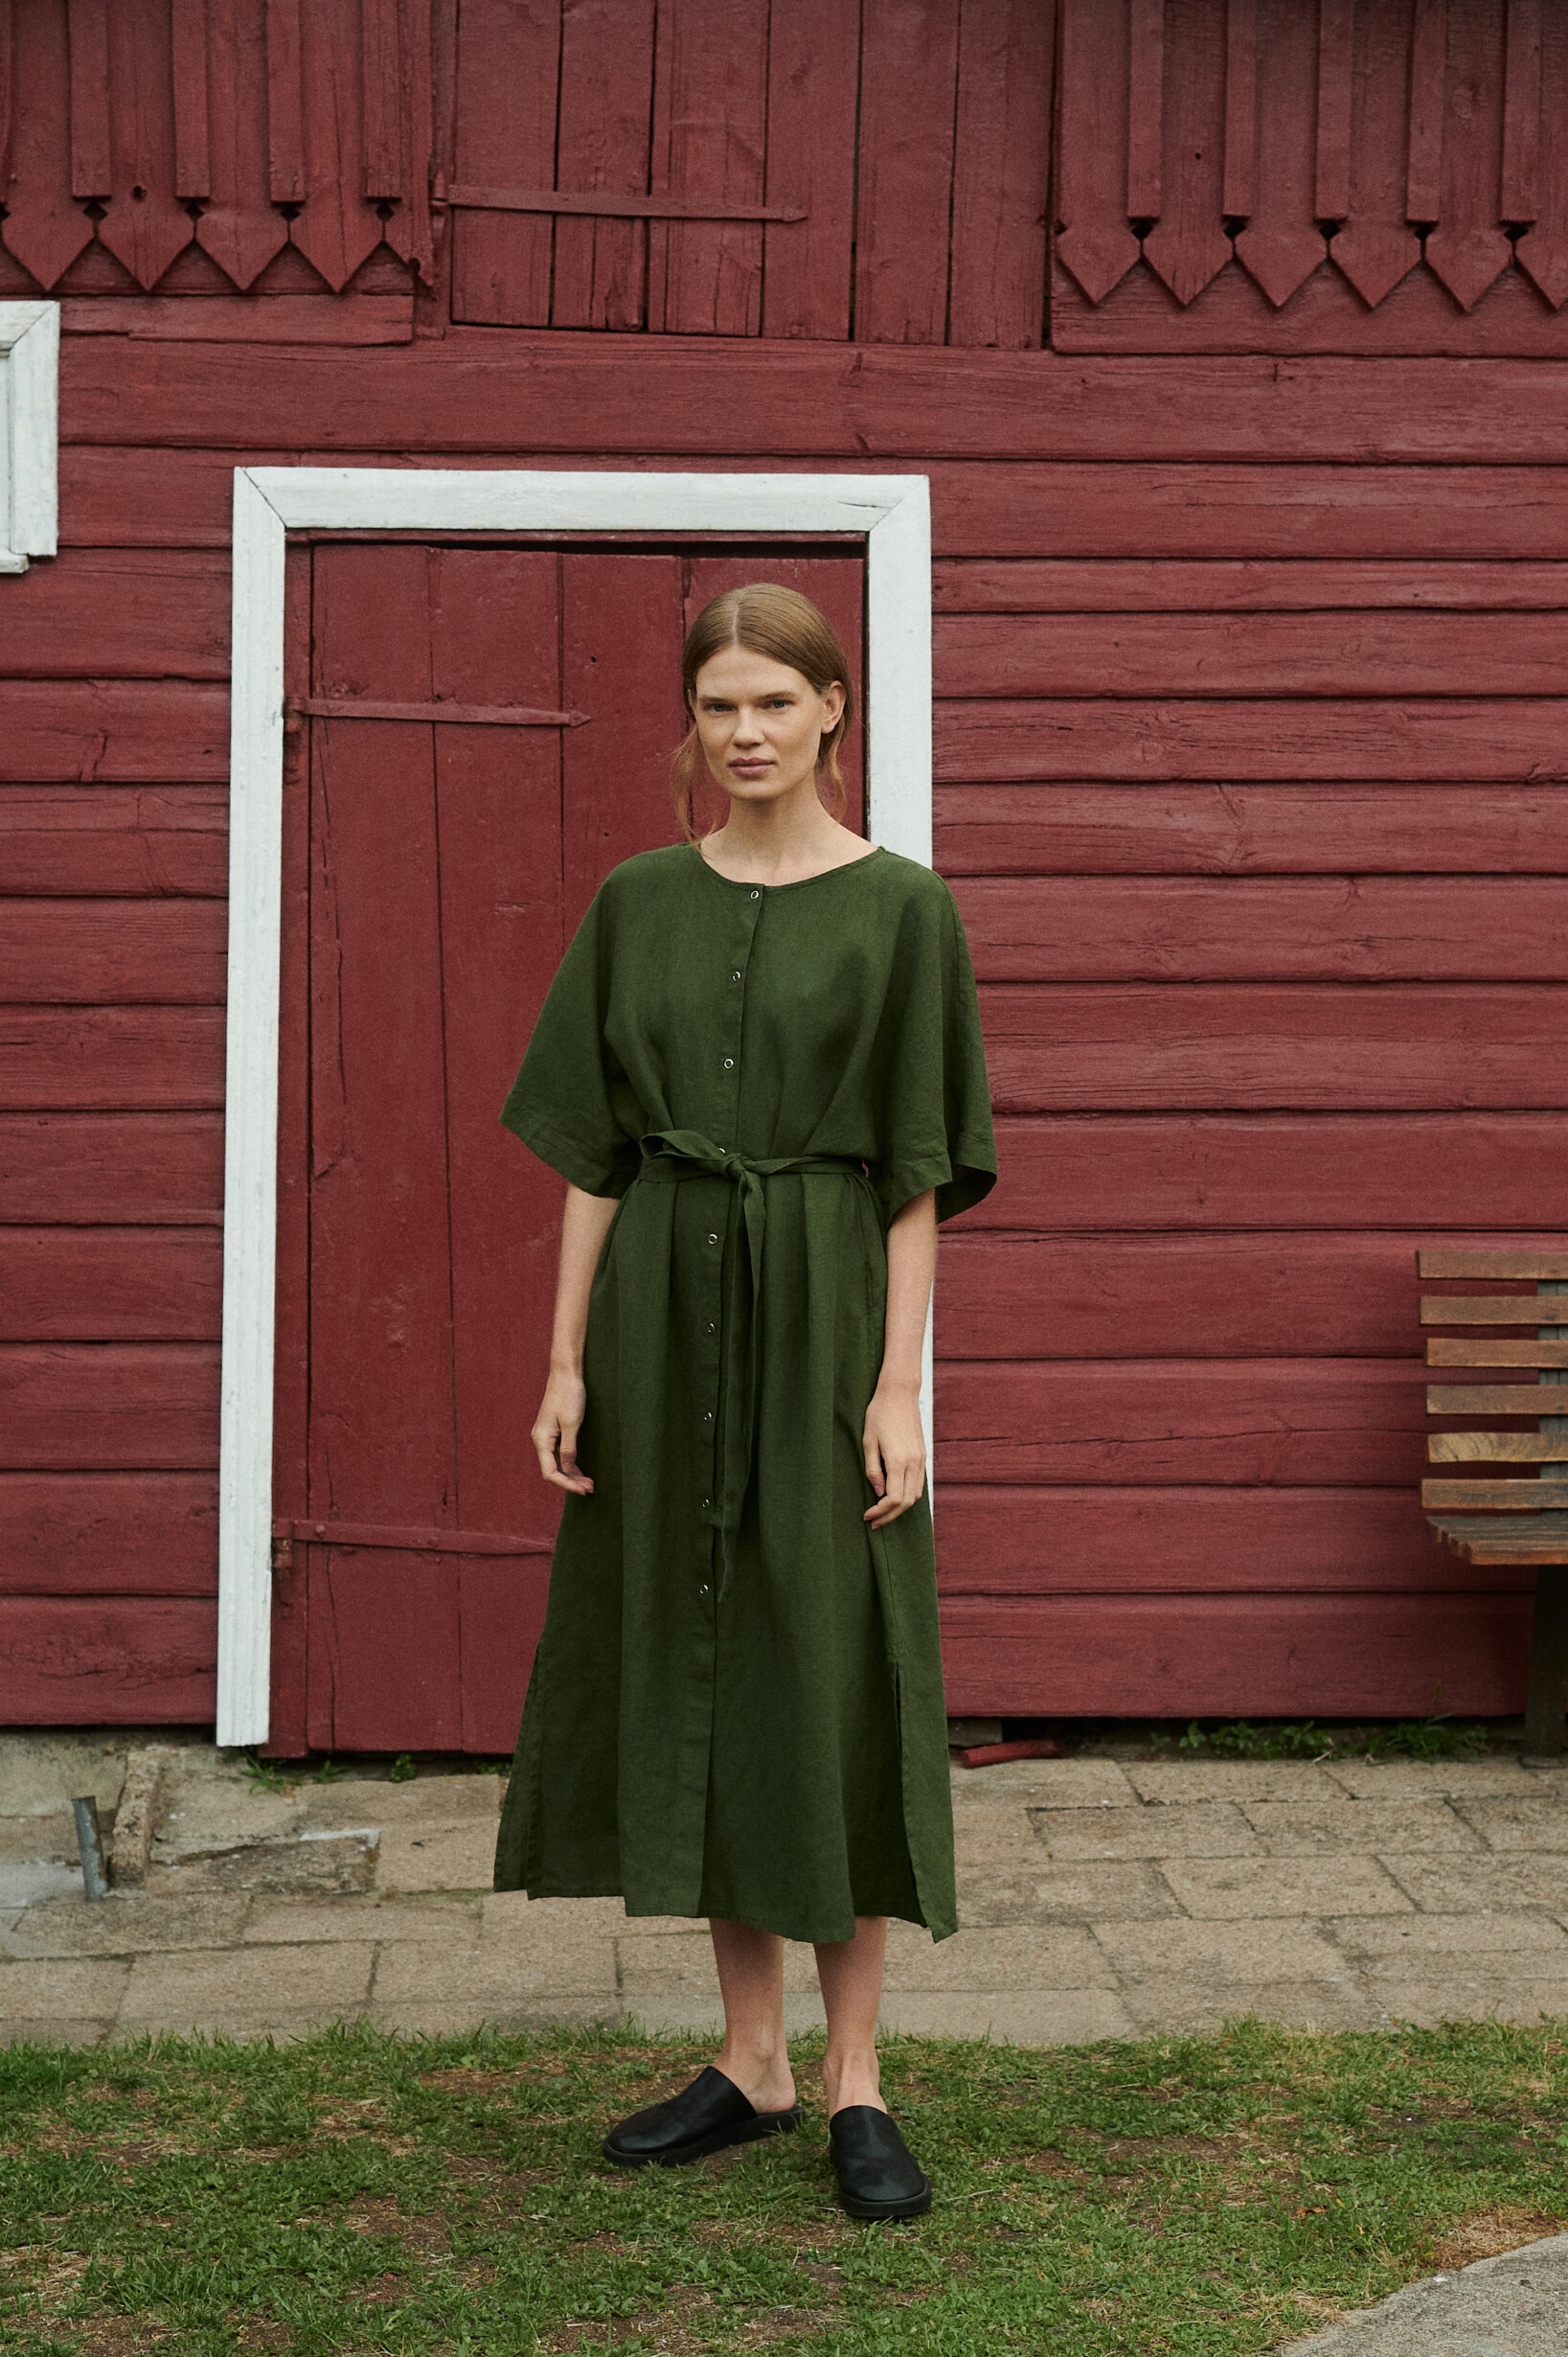 model posing outside the red summer house in an oversized linen dress in forest green with snap openings and belt